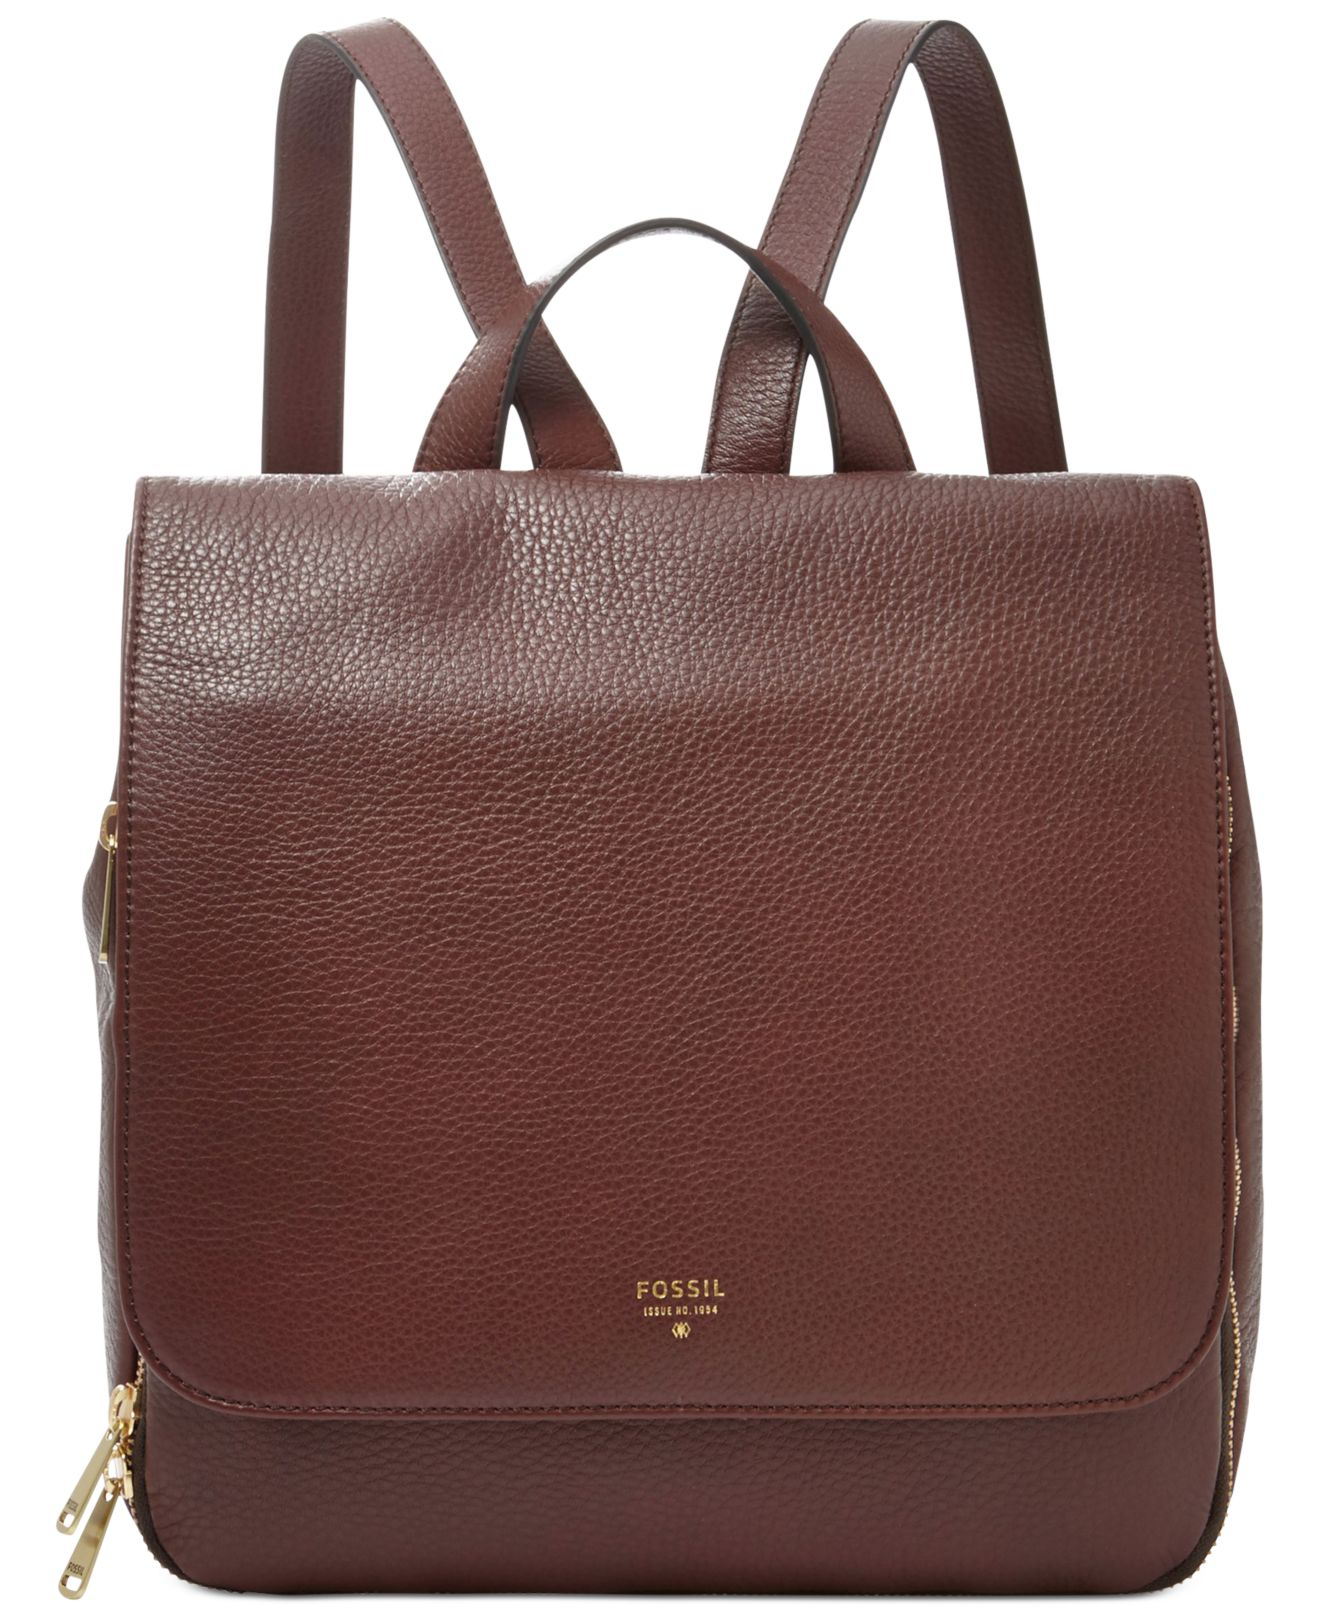 Lyst - Fossil Preston Leather Backpack in Brown